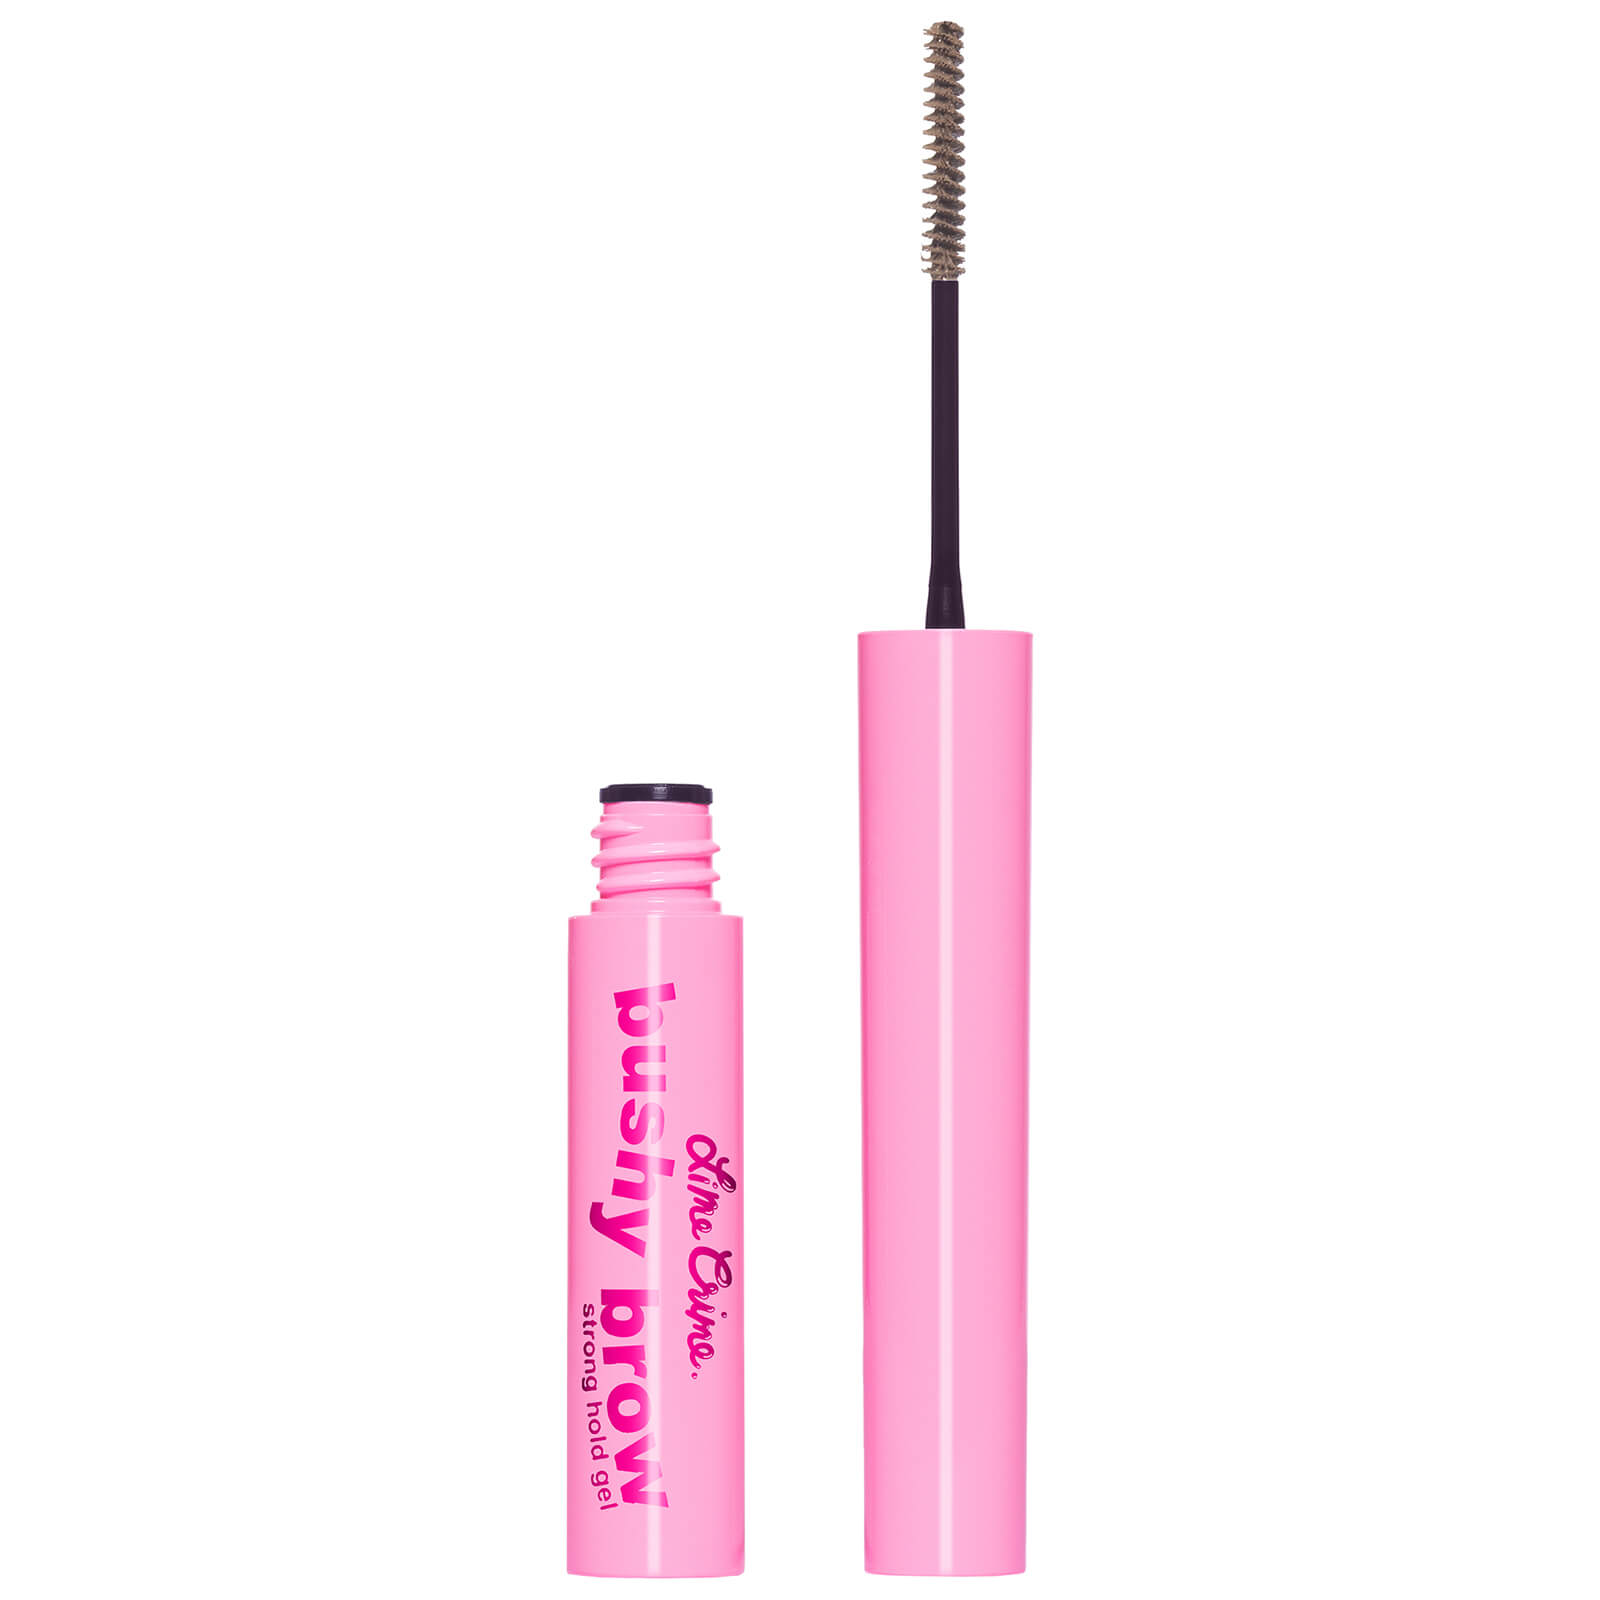 Image of Lime Crime Bushy Brow Gel 3.5ml (Various Shades) - Dirty Blonde